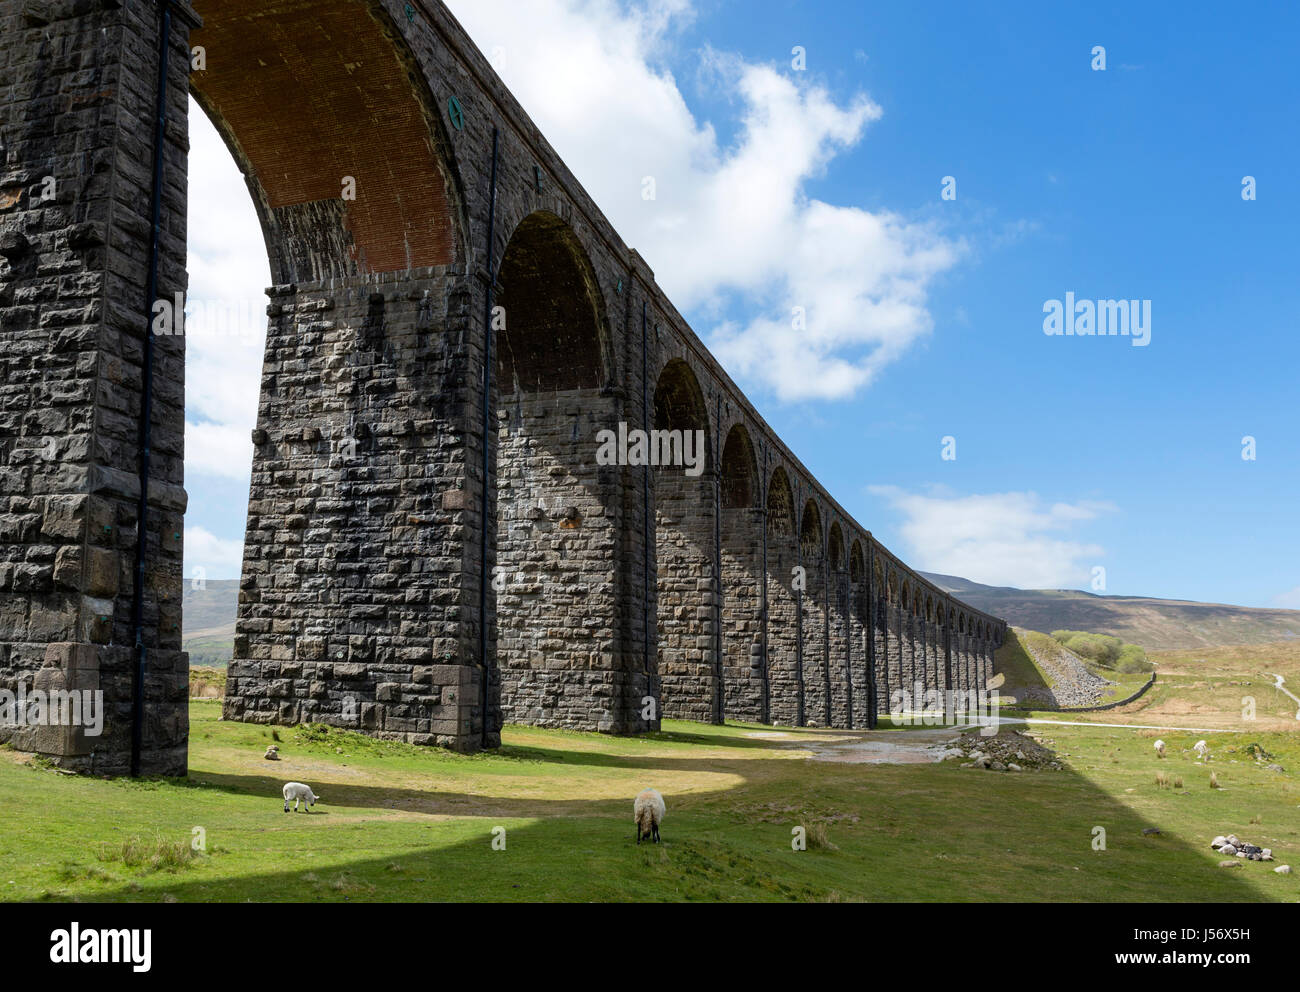 Ribblehead Viaduc, Yorkshire Dales National Park, North Yorkshire, England, UK Banque D'Images